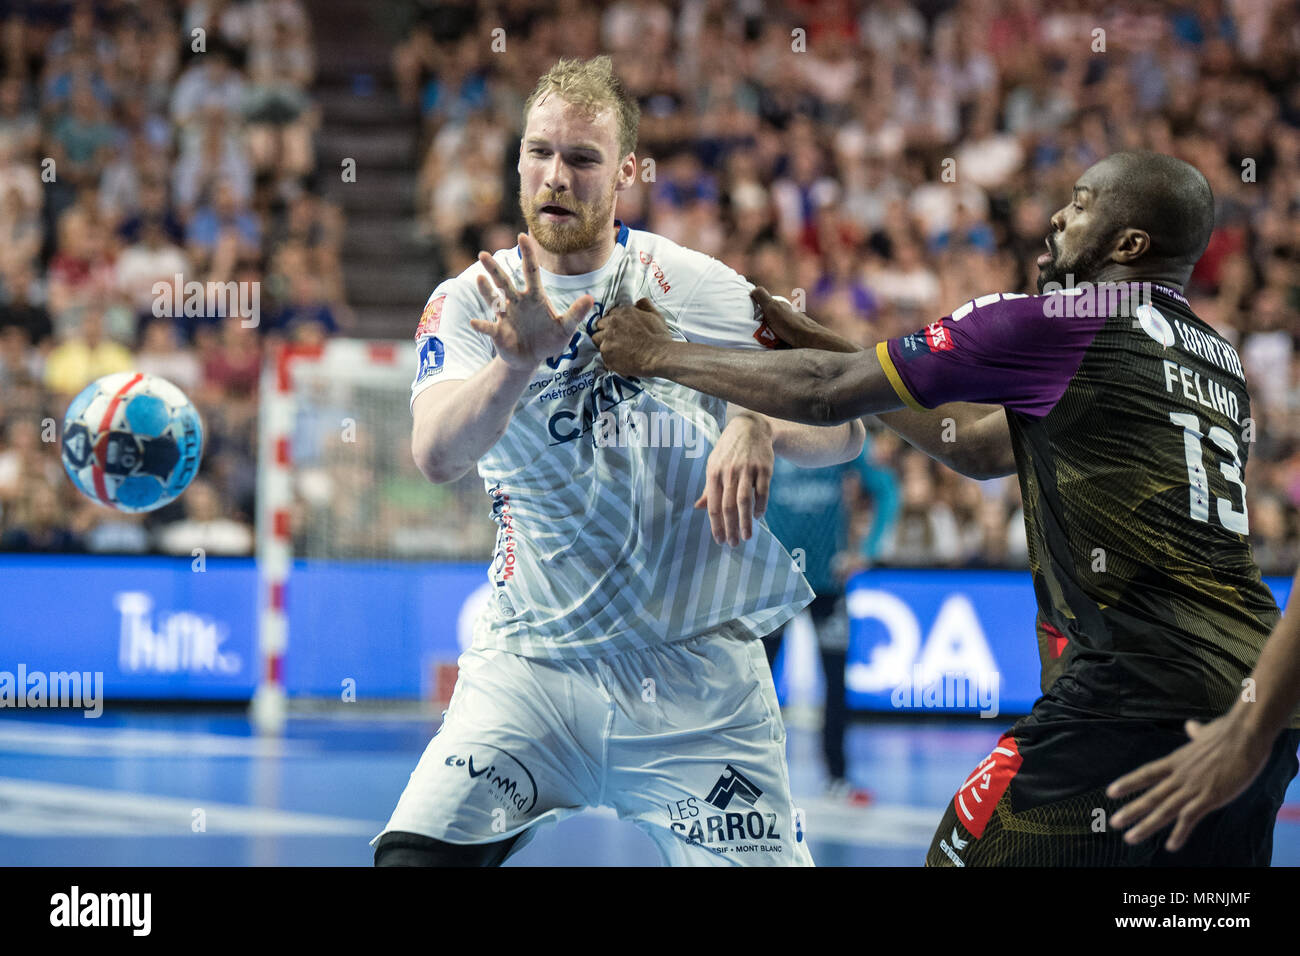 27 May 2018, Germany, Cologne: Handball Champions League final, HBC Nantes vs Montpellier HB at the Lanxess Arena: Rock Feliho (r) of Nantes and Jonas Truchanovicius of Montpellier vie for the ball. Photo: Federico Gambarini/dpa Stock Photo